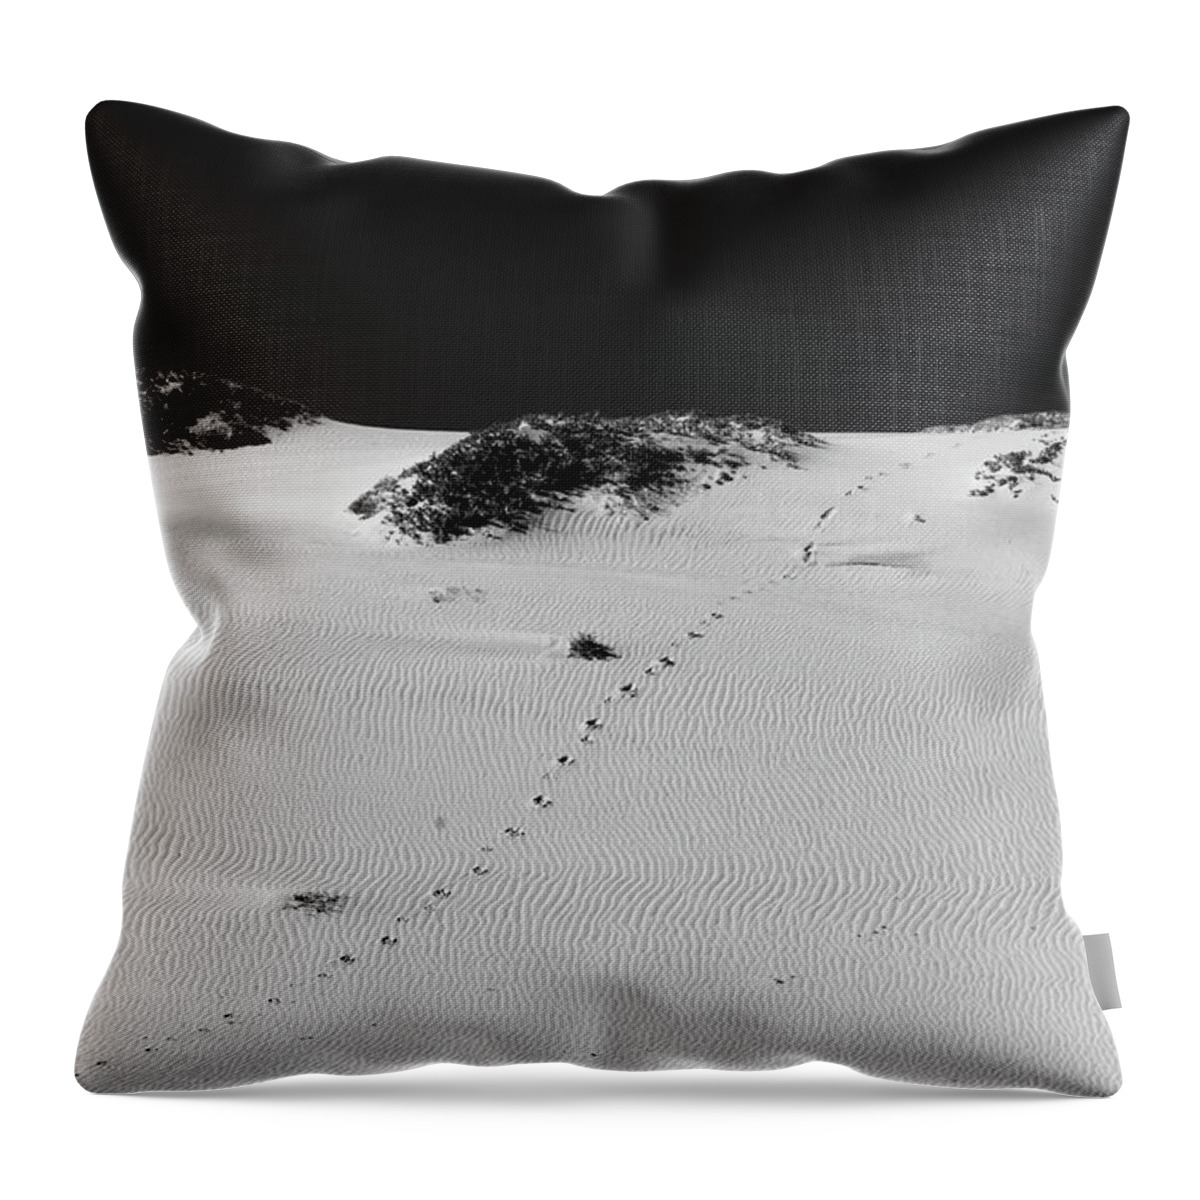 Sand Throw Pillow featuring the photograph The Path - Black and White by David Smith